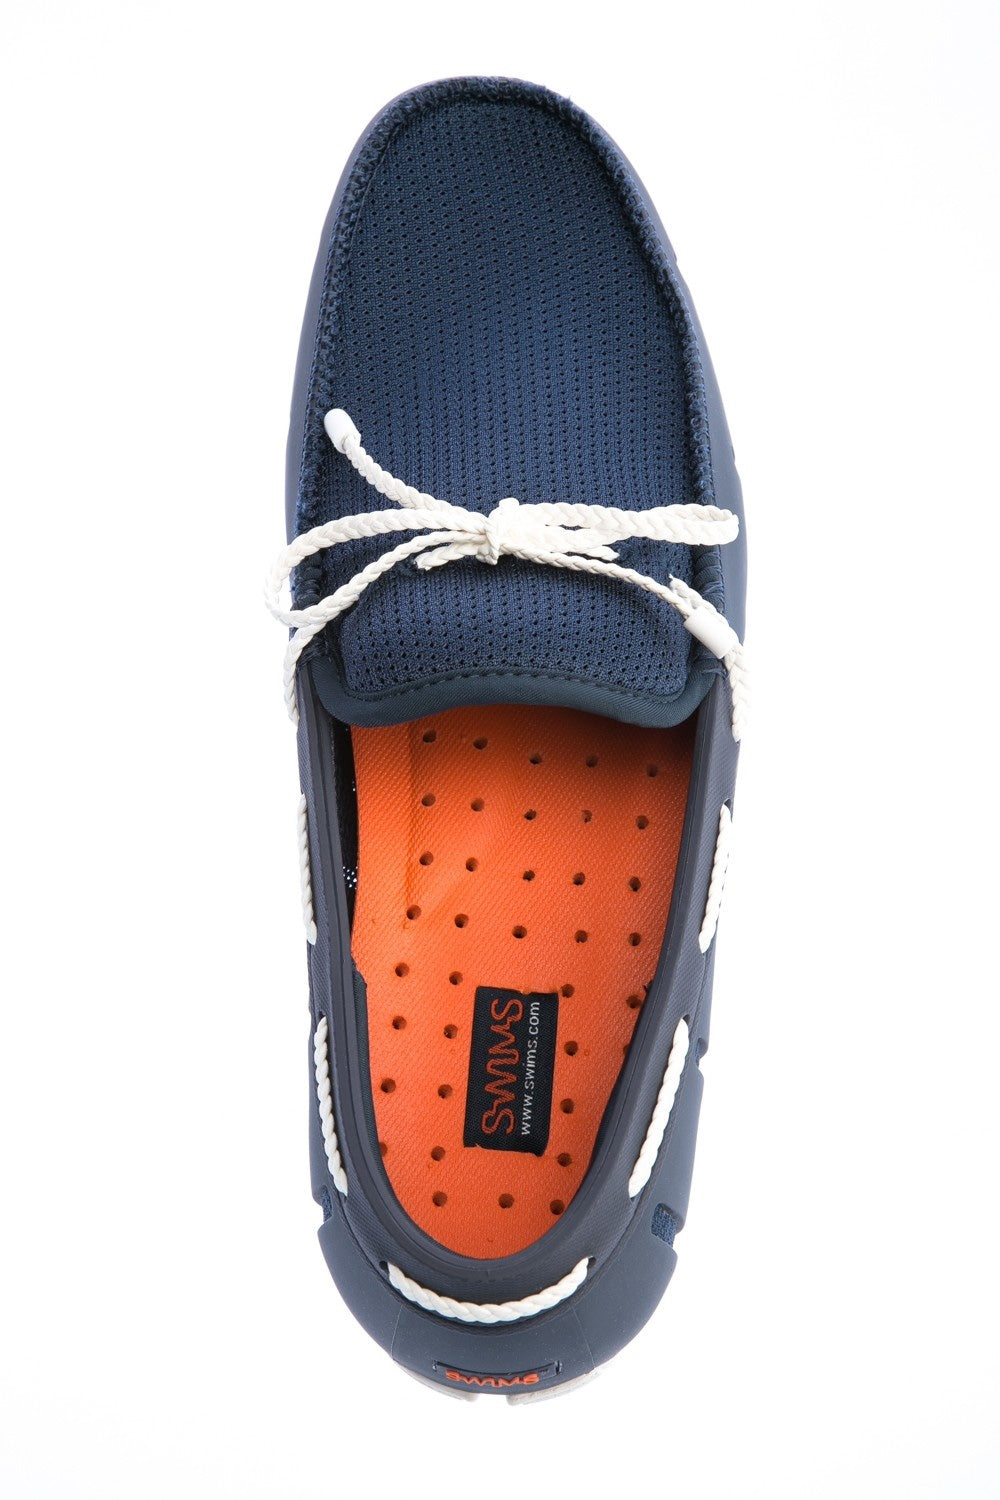 Swims Braided Lace Loafer Shoe in Navy & White Birdseye